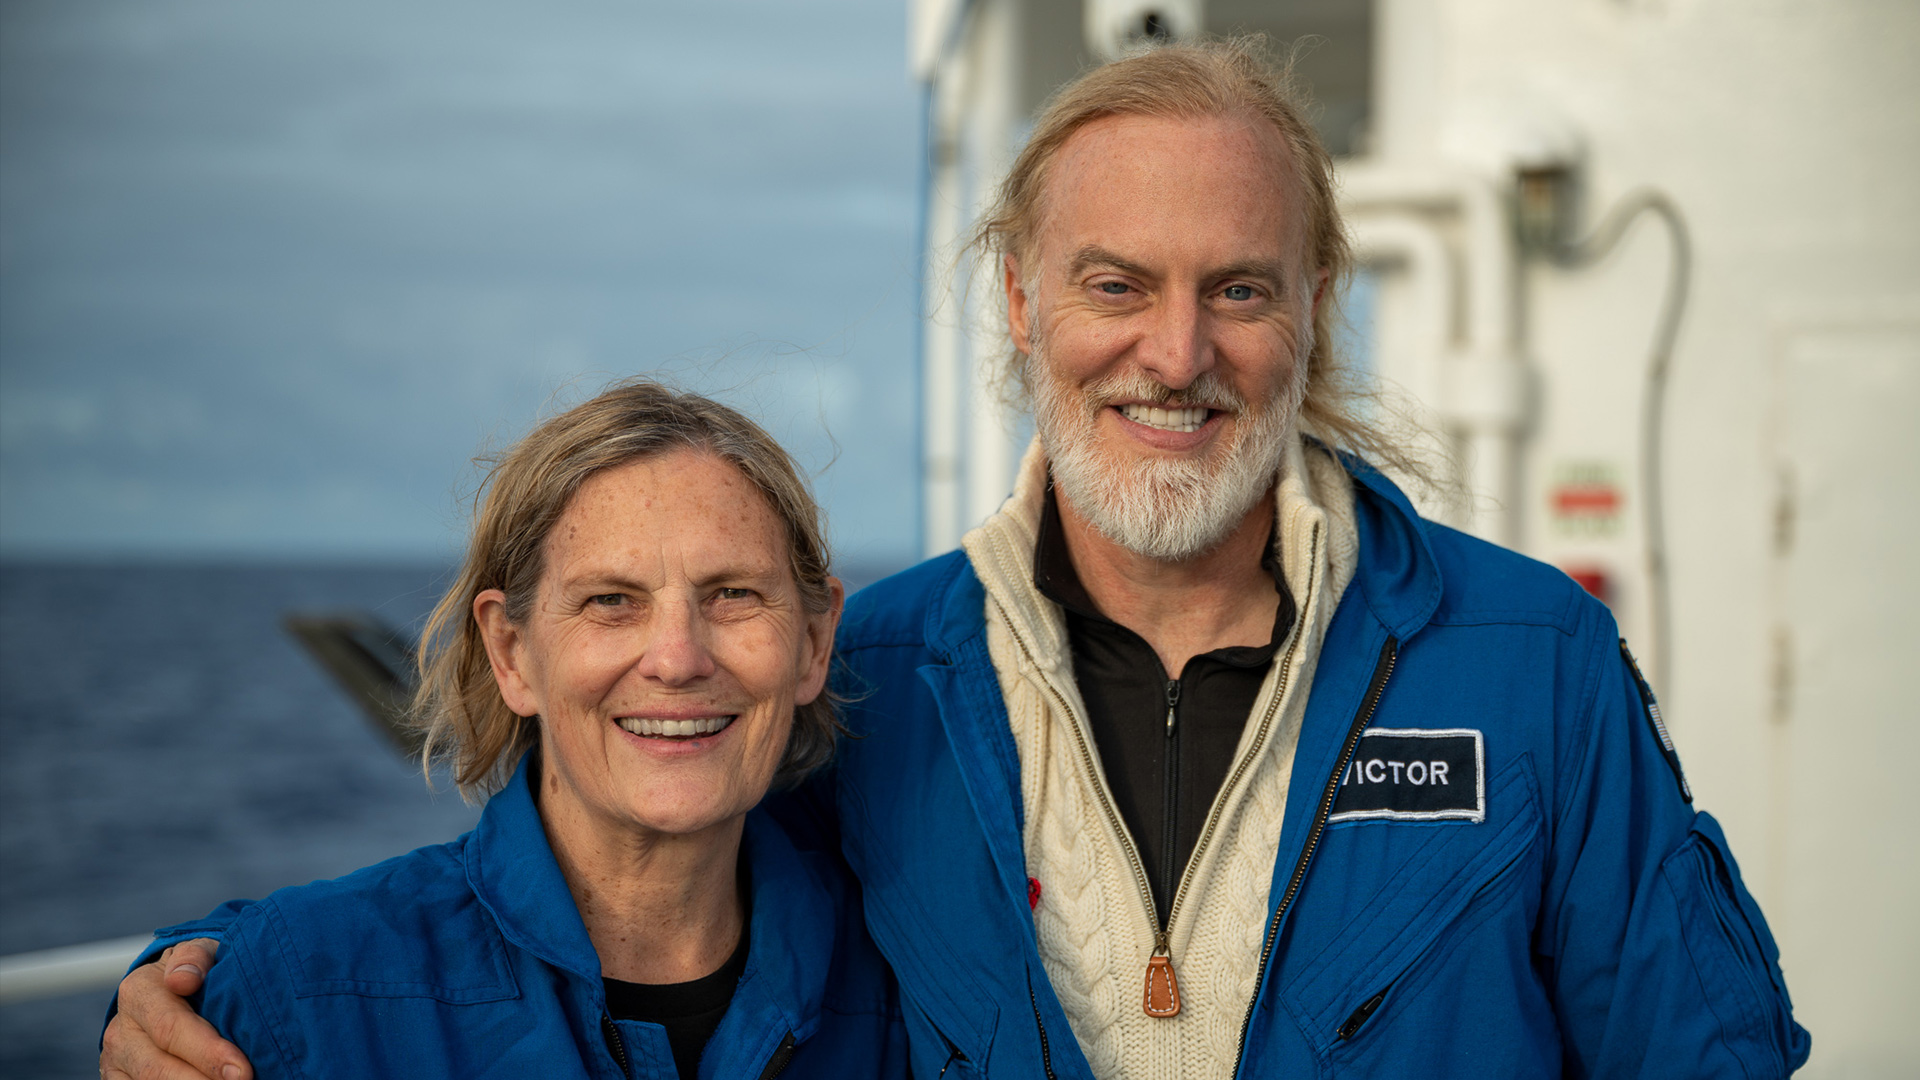 Kathy Sullivan becomes first woman to Challenger Deep; EYOS coordinates call between International Space Station and DSSV Pressure Drop